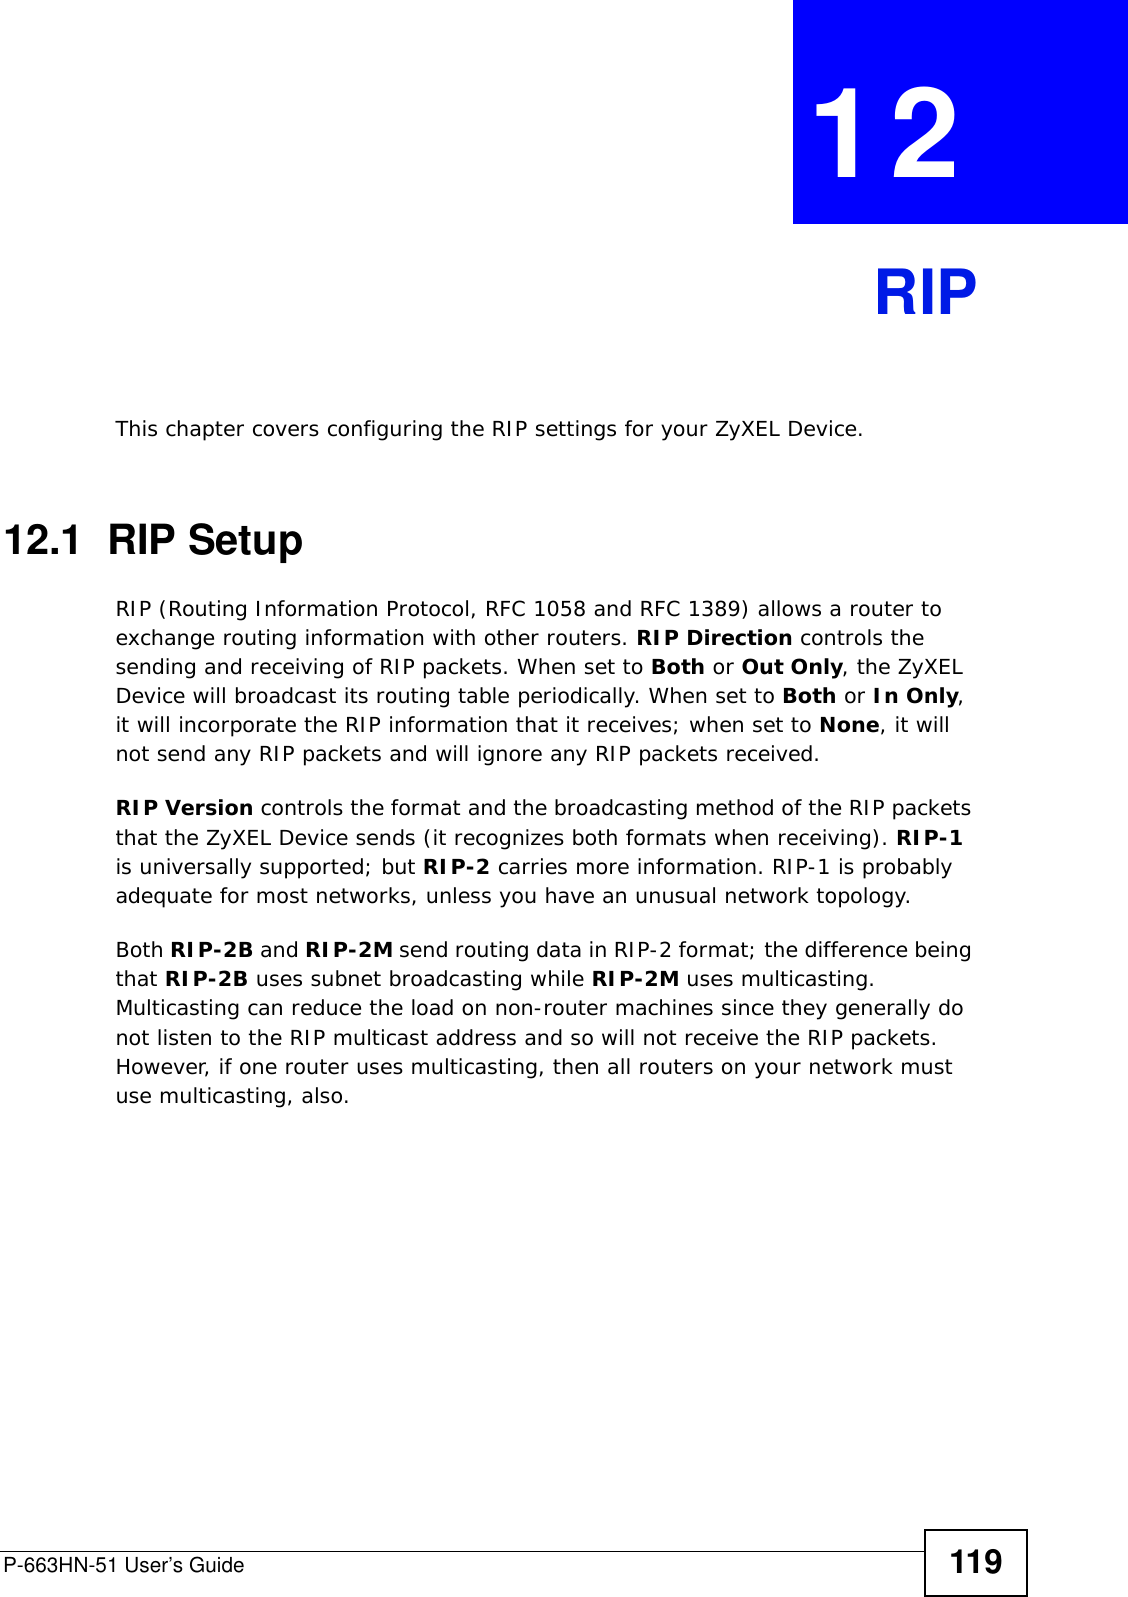 P-663HN-51 User’s Guide 119CHAPTER  12 RIPThis chapter covers configuring the RIP settings for your ZyXEL Device.12.1  RIP SetupRIP (Routing Information Protocol, RFC 1058 and RFC 1389) allows a router to exchange routing information with other routers. RIP Direction controls the sending and receiving of RIP packets. When set to Both or Out Only, the ZyXEL Device will broadcast its routing table periodically. When set to Both or In Only, it will incorporate the RIP information that it receives; when set to None, it will not send any RIP packets and will ignore any RIP packets received.  RIP Version controls the format and the broadcasting method of the RIP packets that the ZyXEL Device sends (it recognizes both formats when receiving). RIP-1 is universally supported; but RIP-2 carries more information. RIP-1 is probably adequate for most networks, unless you have an unusual network topology.Both RIP-2B and RIP-2M send routing data in RIP-2 format; the difference being that RIP-2B uses subnet broadcasting while RIP-2M uses multicasting. Multicasting can reduce the load on non-router machines since they generally do not listen to the RIP multicast address and so will not receive the RIP packets. However, if one router uses multicasting, then all routers on your network must use multicasting, also.